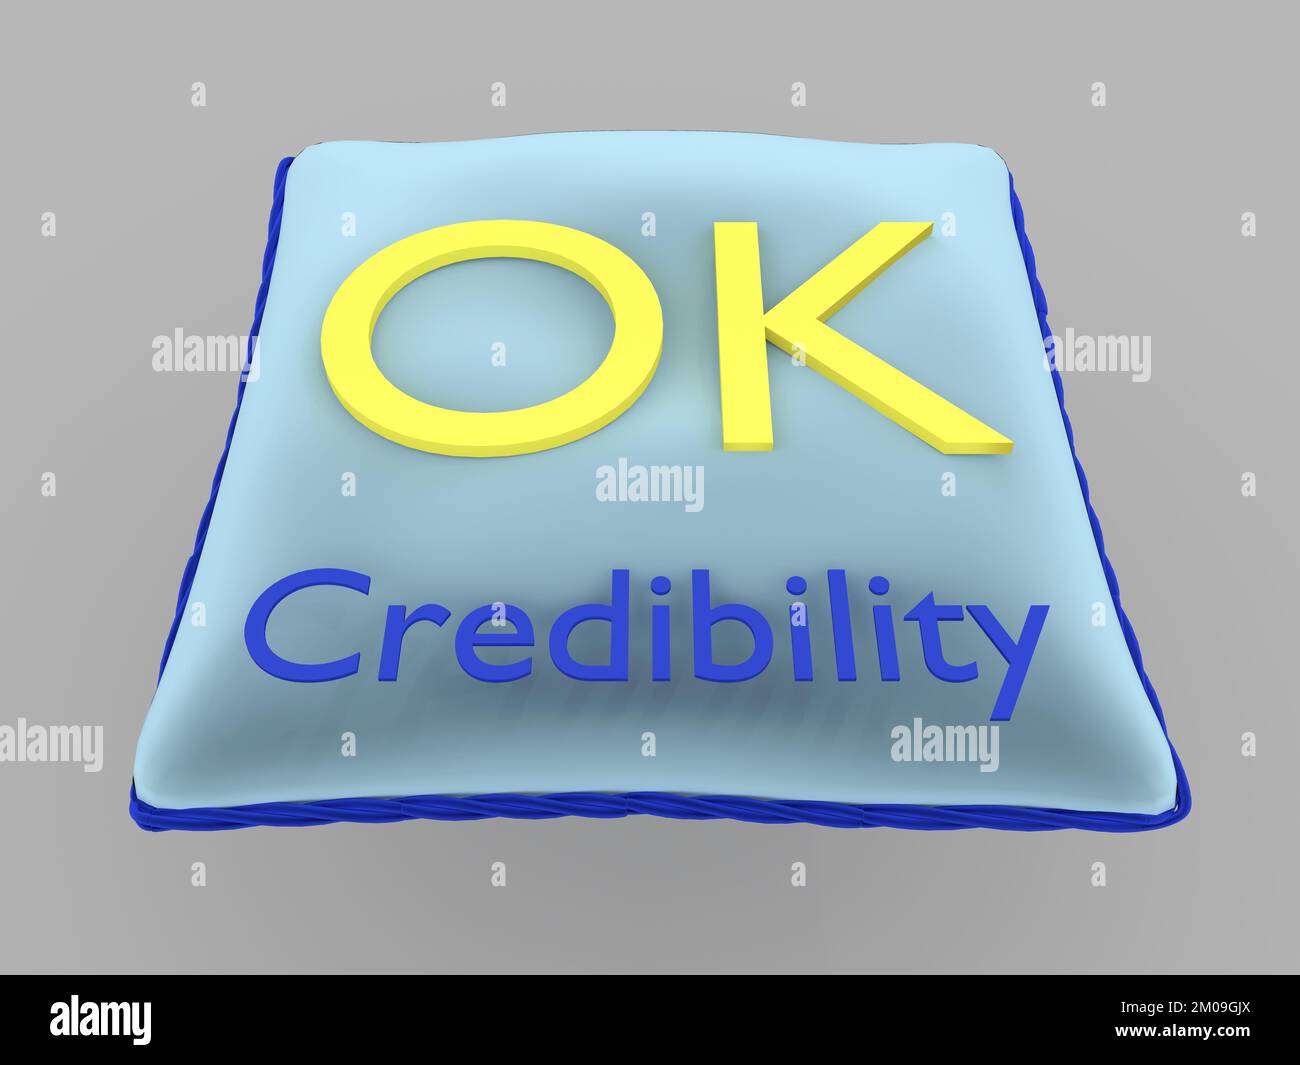 3D illustration of a golden OK Title on pale blue velvet pillow with Credibility subtitle, isolated on gray. Stock Photo